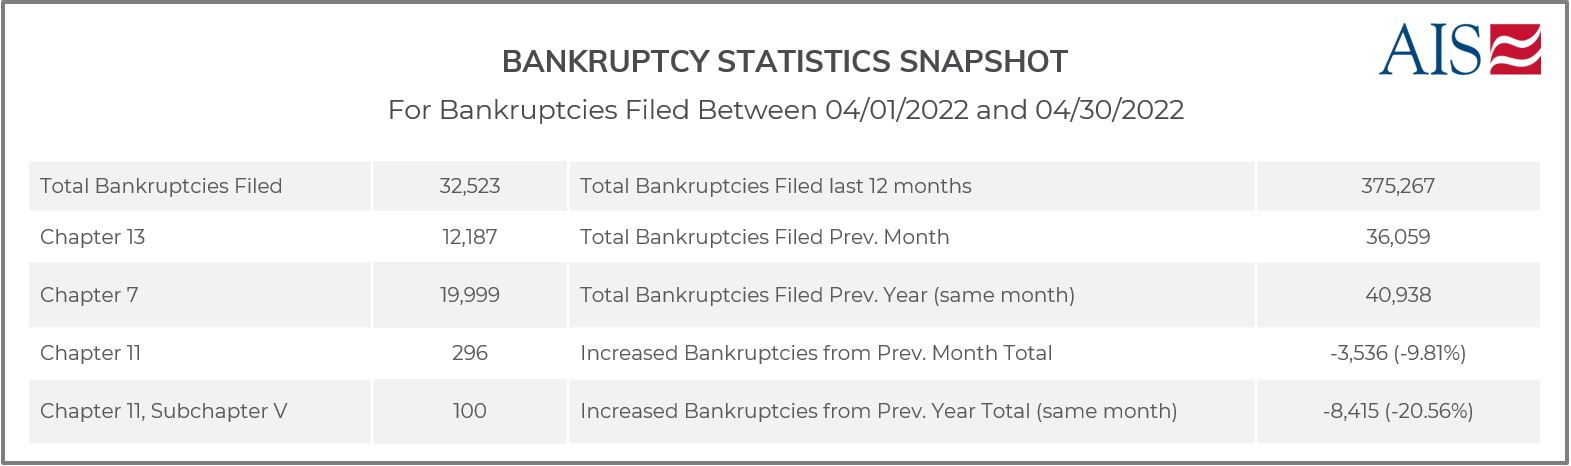 AIS INSIGHT_APRIL 2022_BANKRUPTCY FILINGS BY REGION (PAGE SCREENSHOT)-1-1